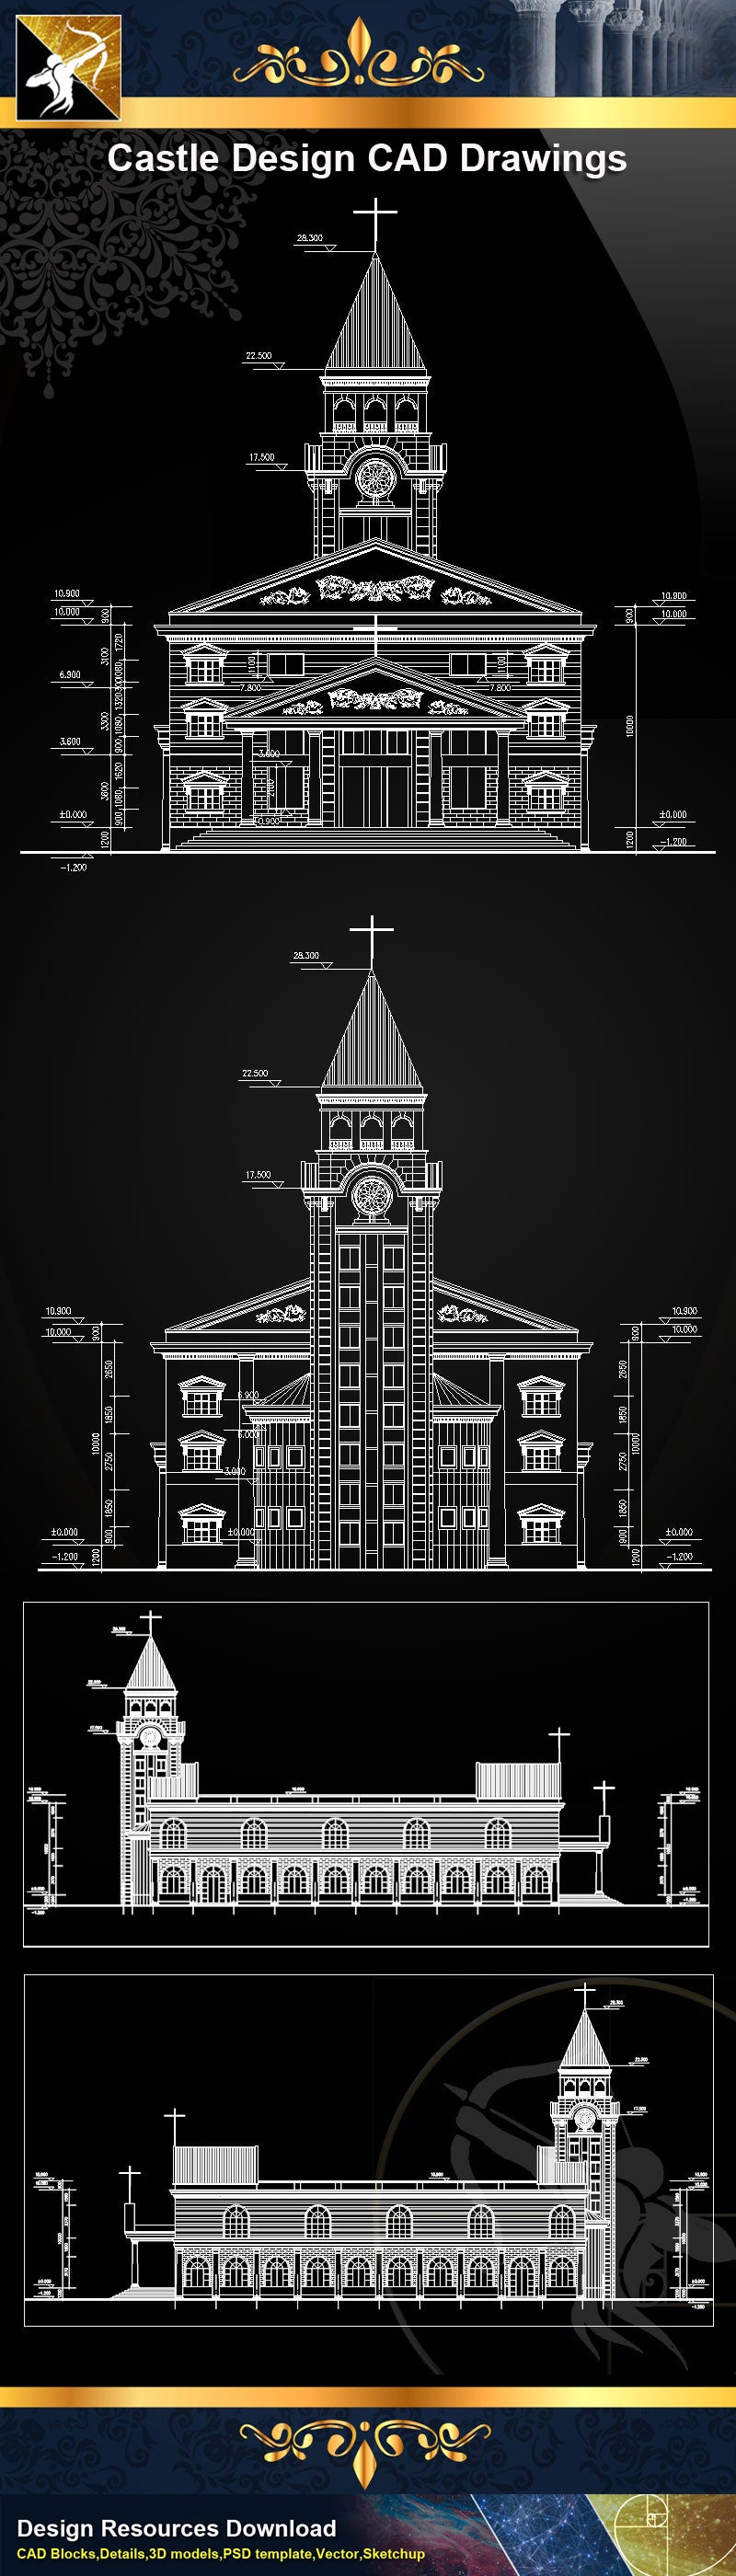 Church Plan,elevation,Details CAD Drawings